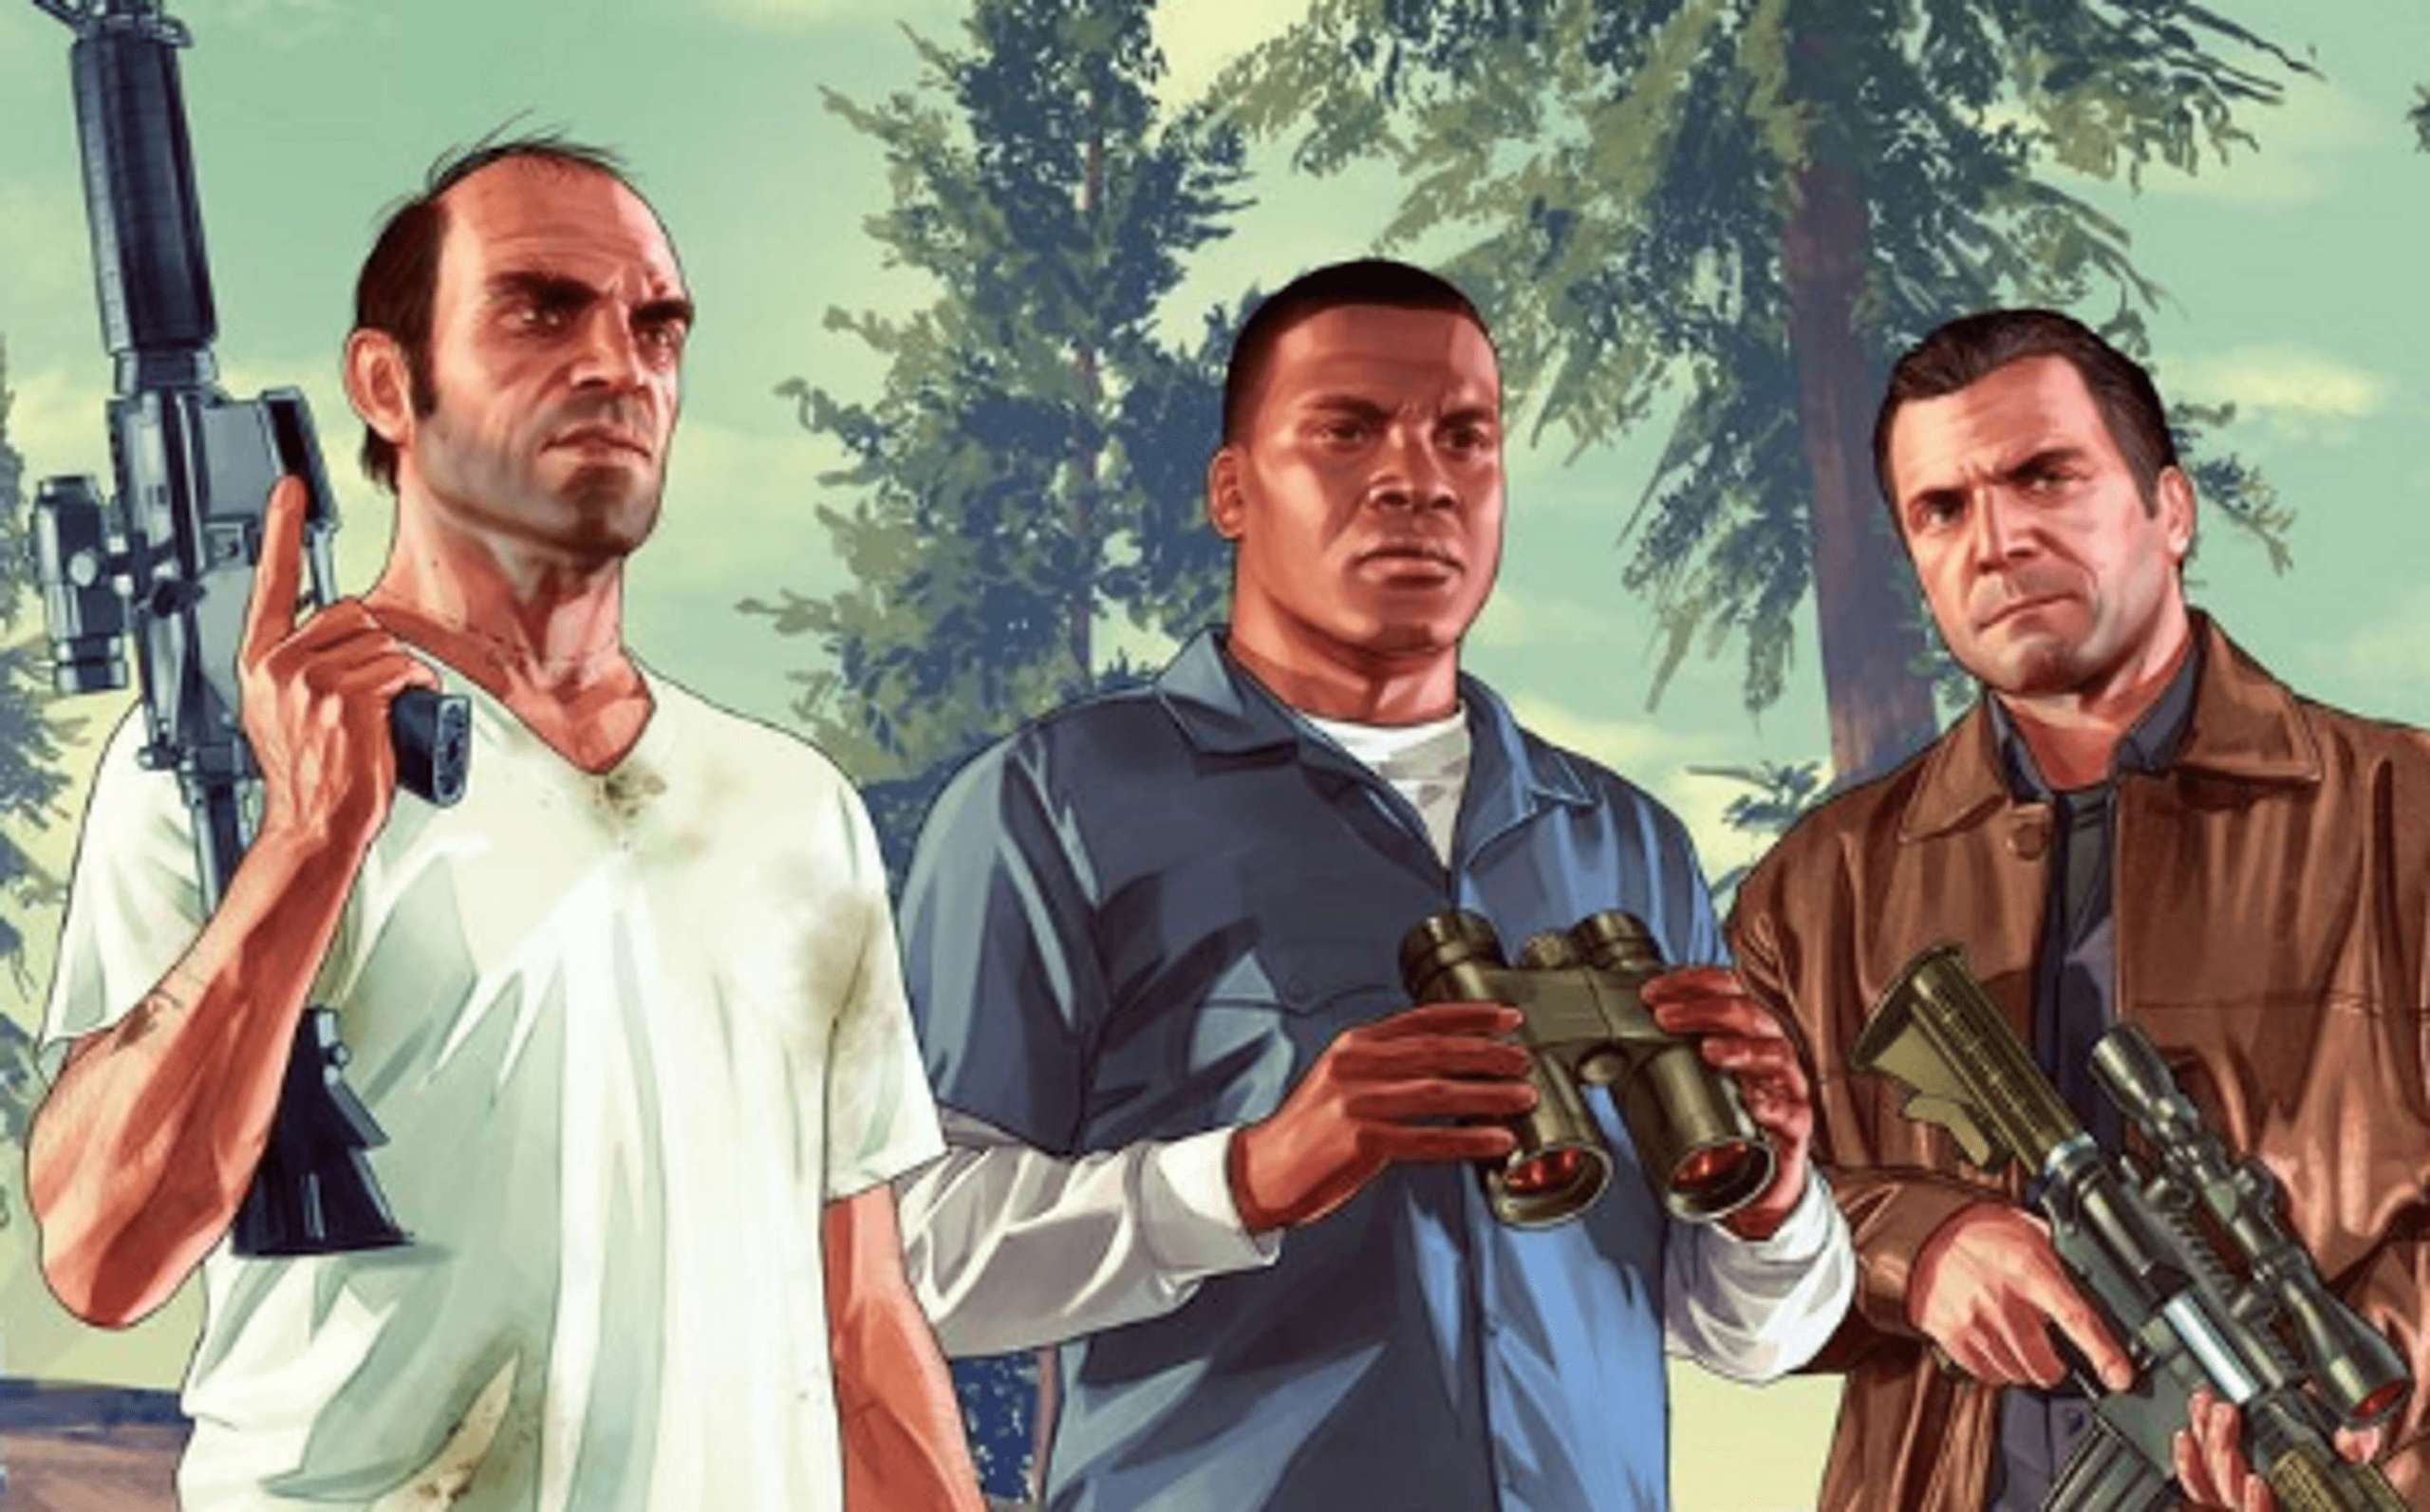 There Have Been Numerous Grand Theft Auto 6 Rumours, One Of Which Is Regarding The Main Characters